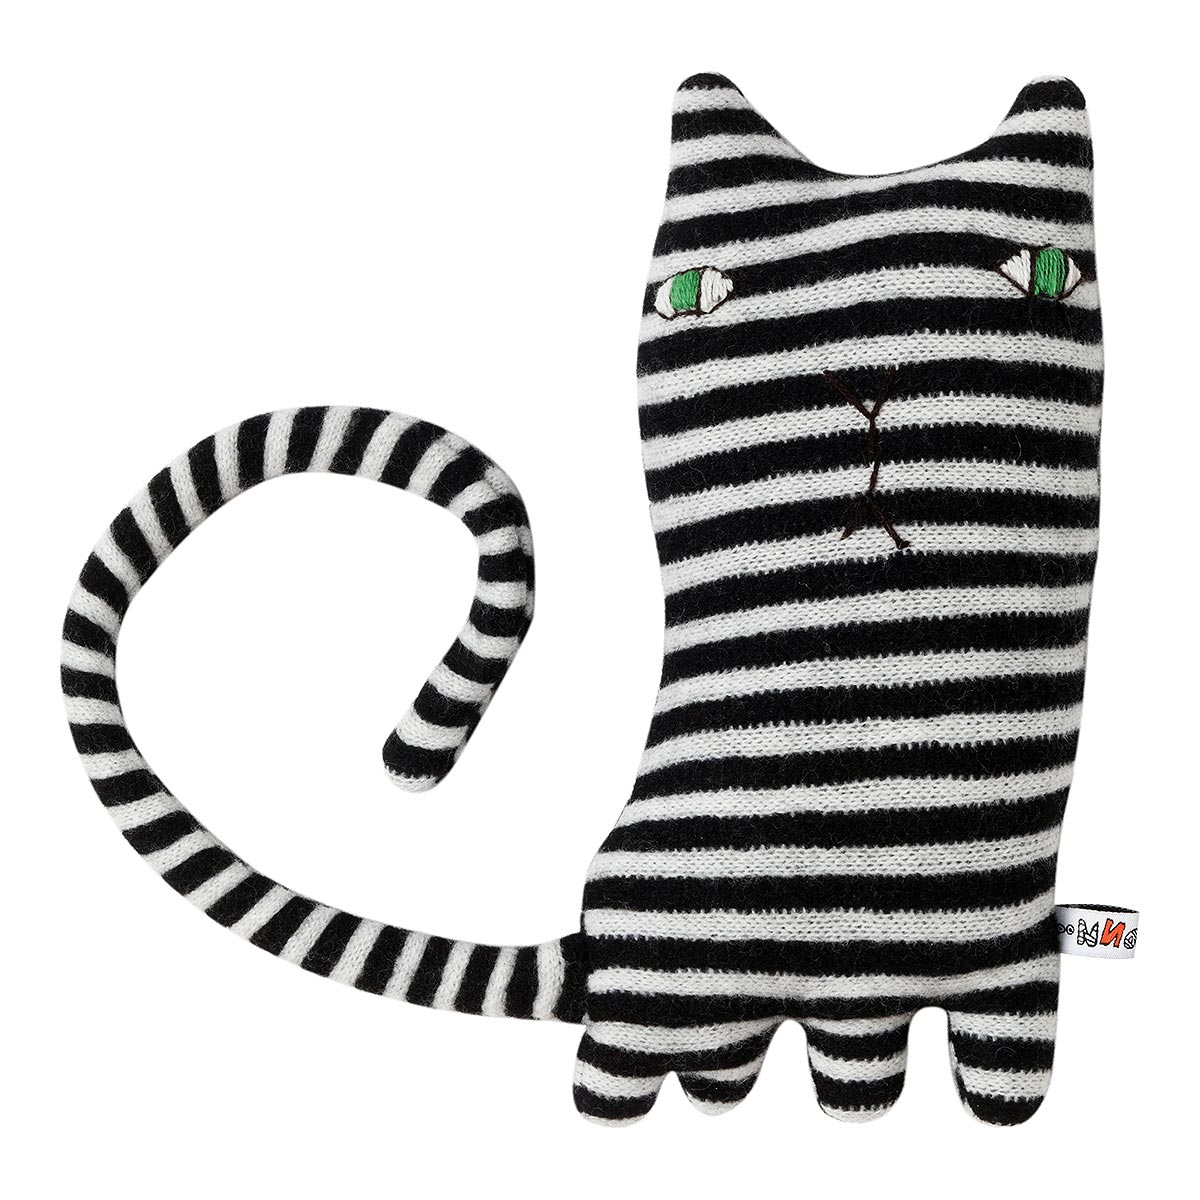 grey and white striped cat toy on white background